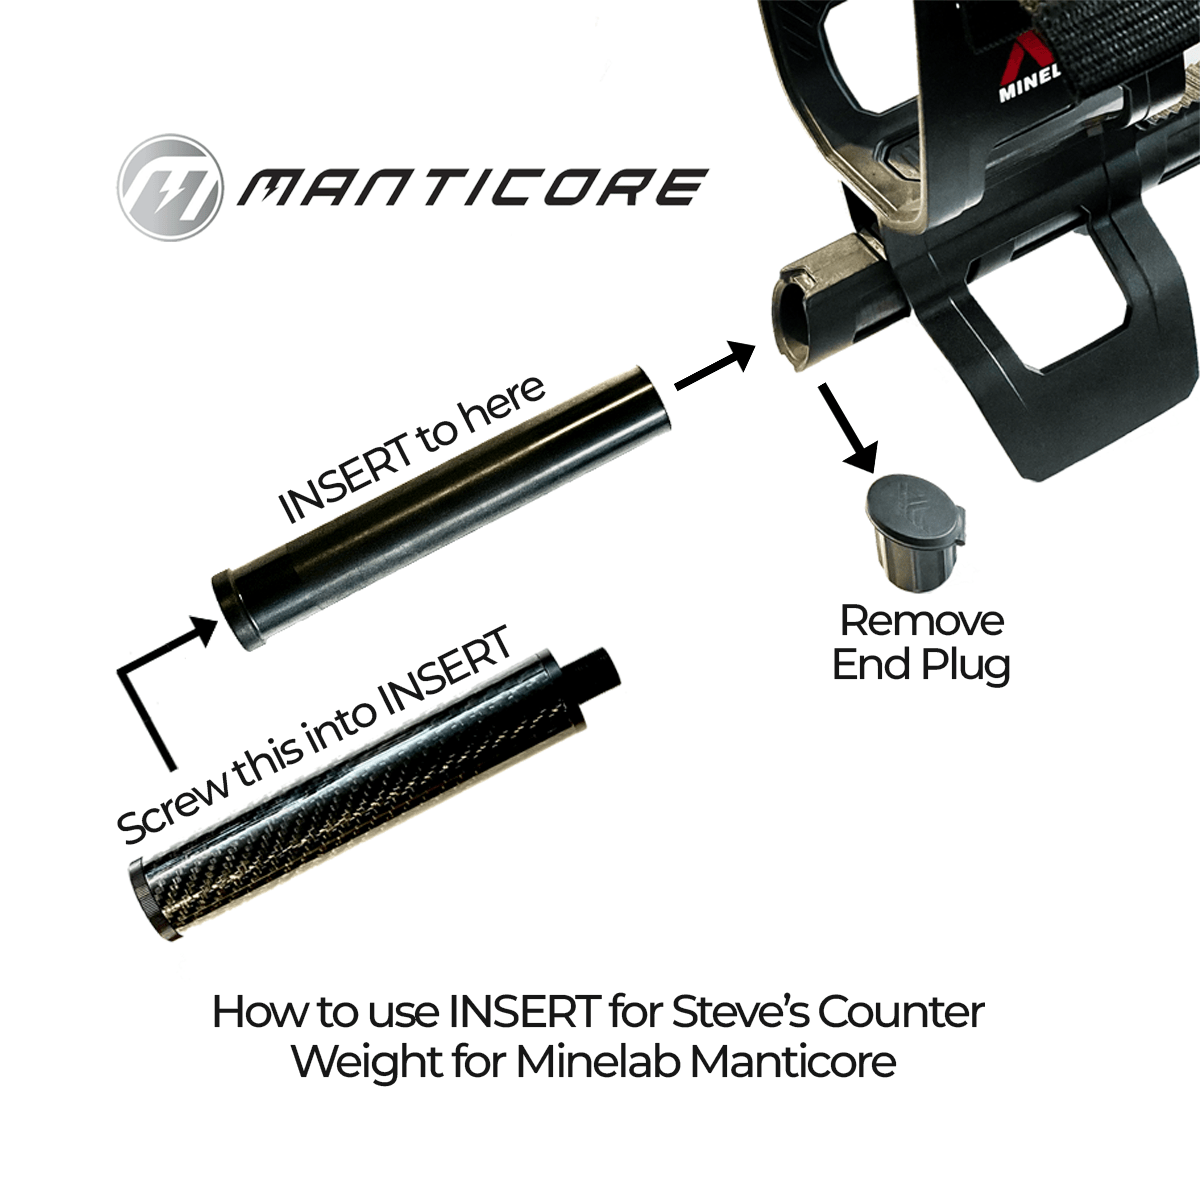 Why You Need Minelab Manticore & Equinox Counterweights For Metal Detecting